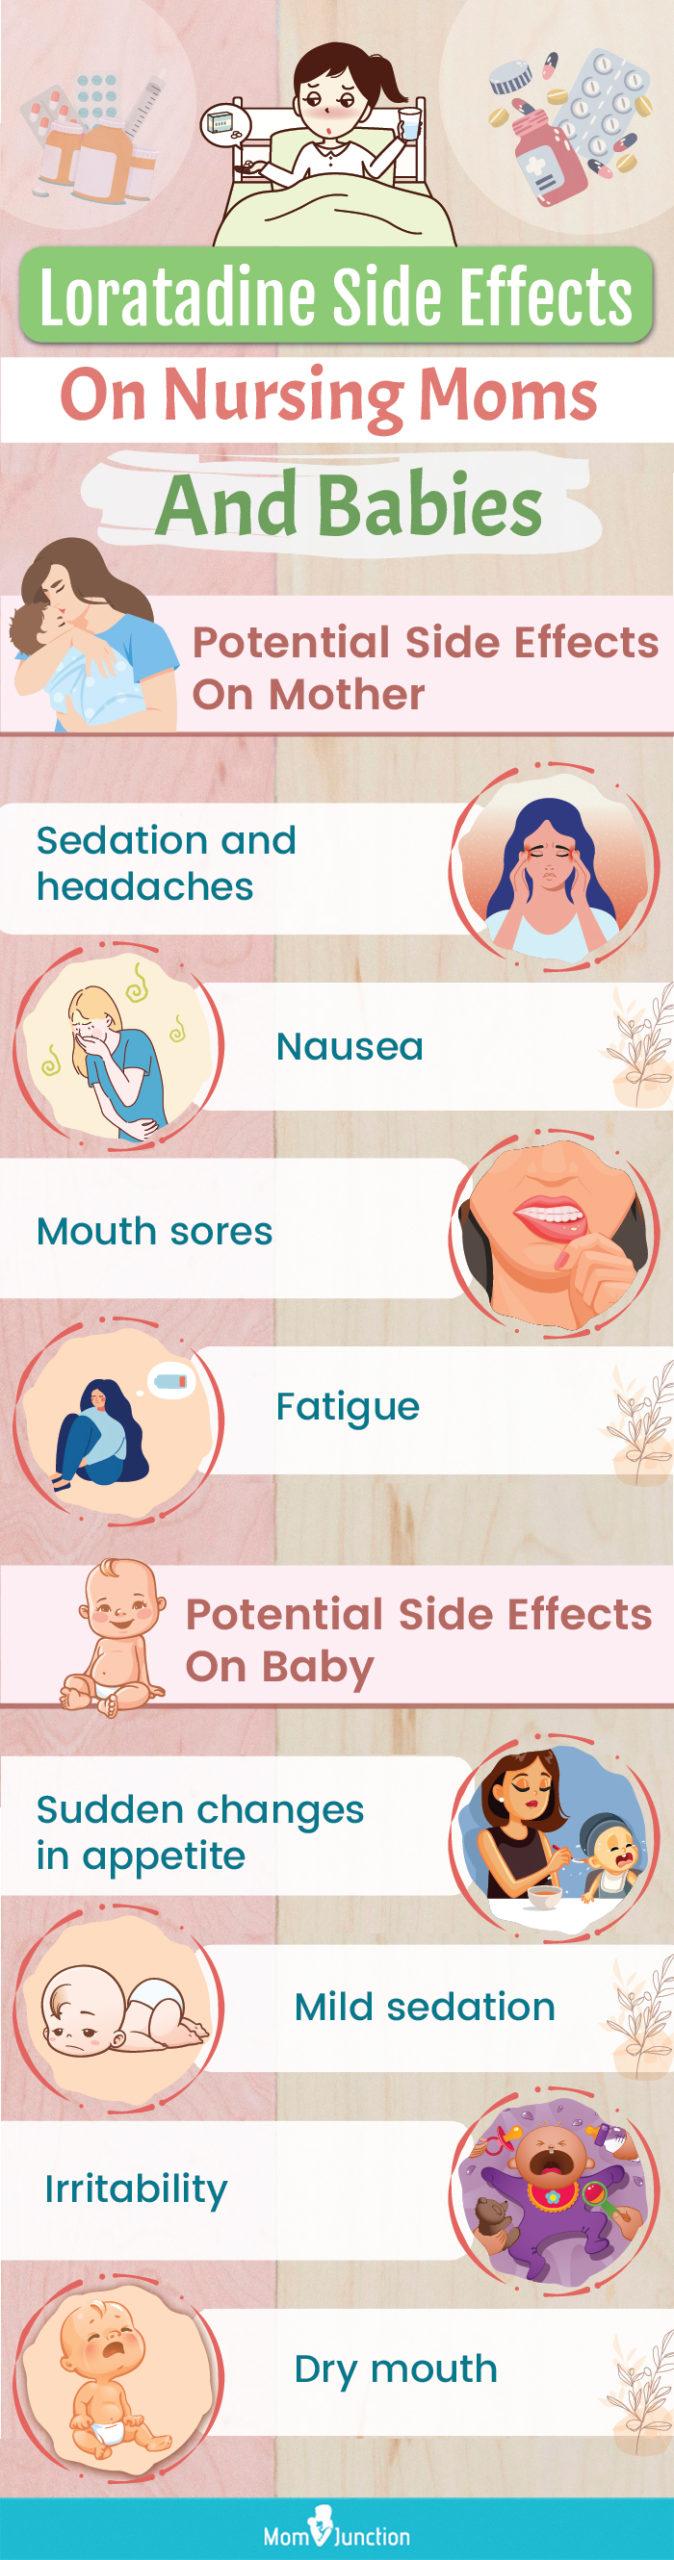 loratadine side effects on nursing moms and babies [infographic]